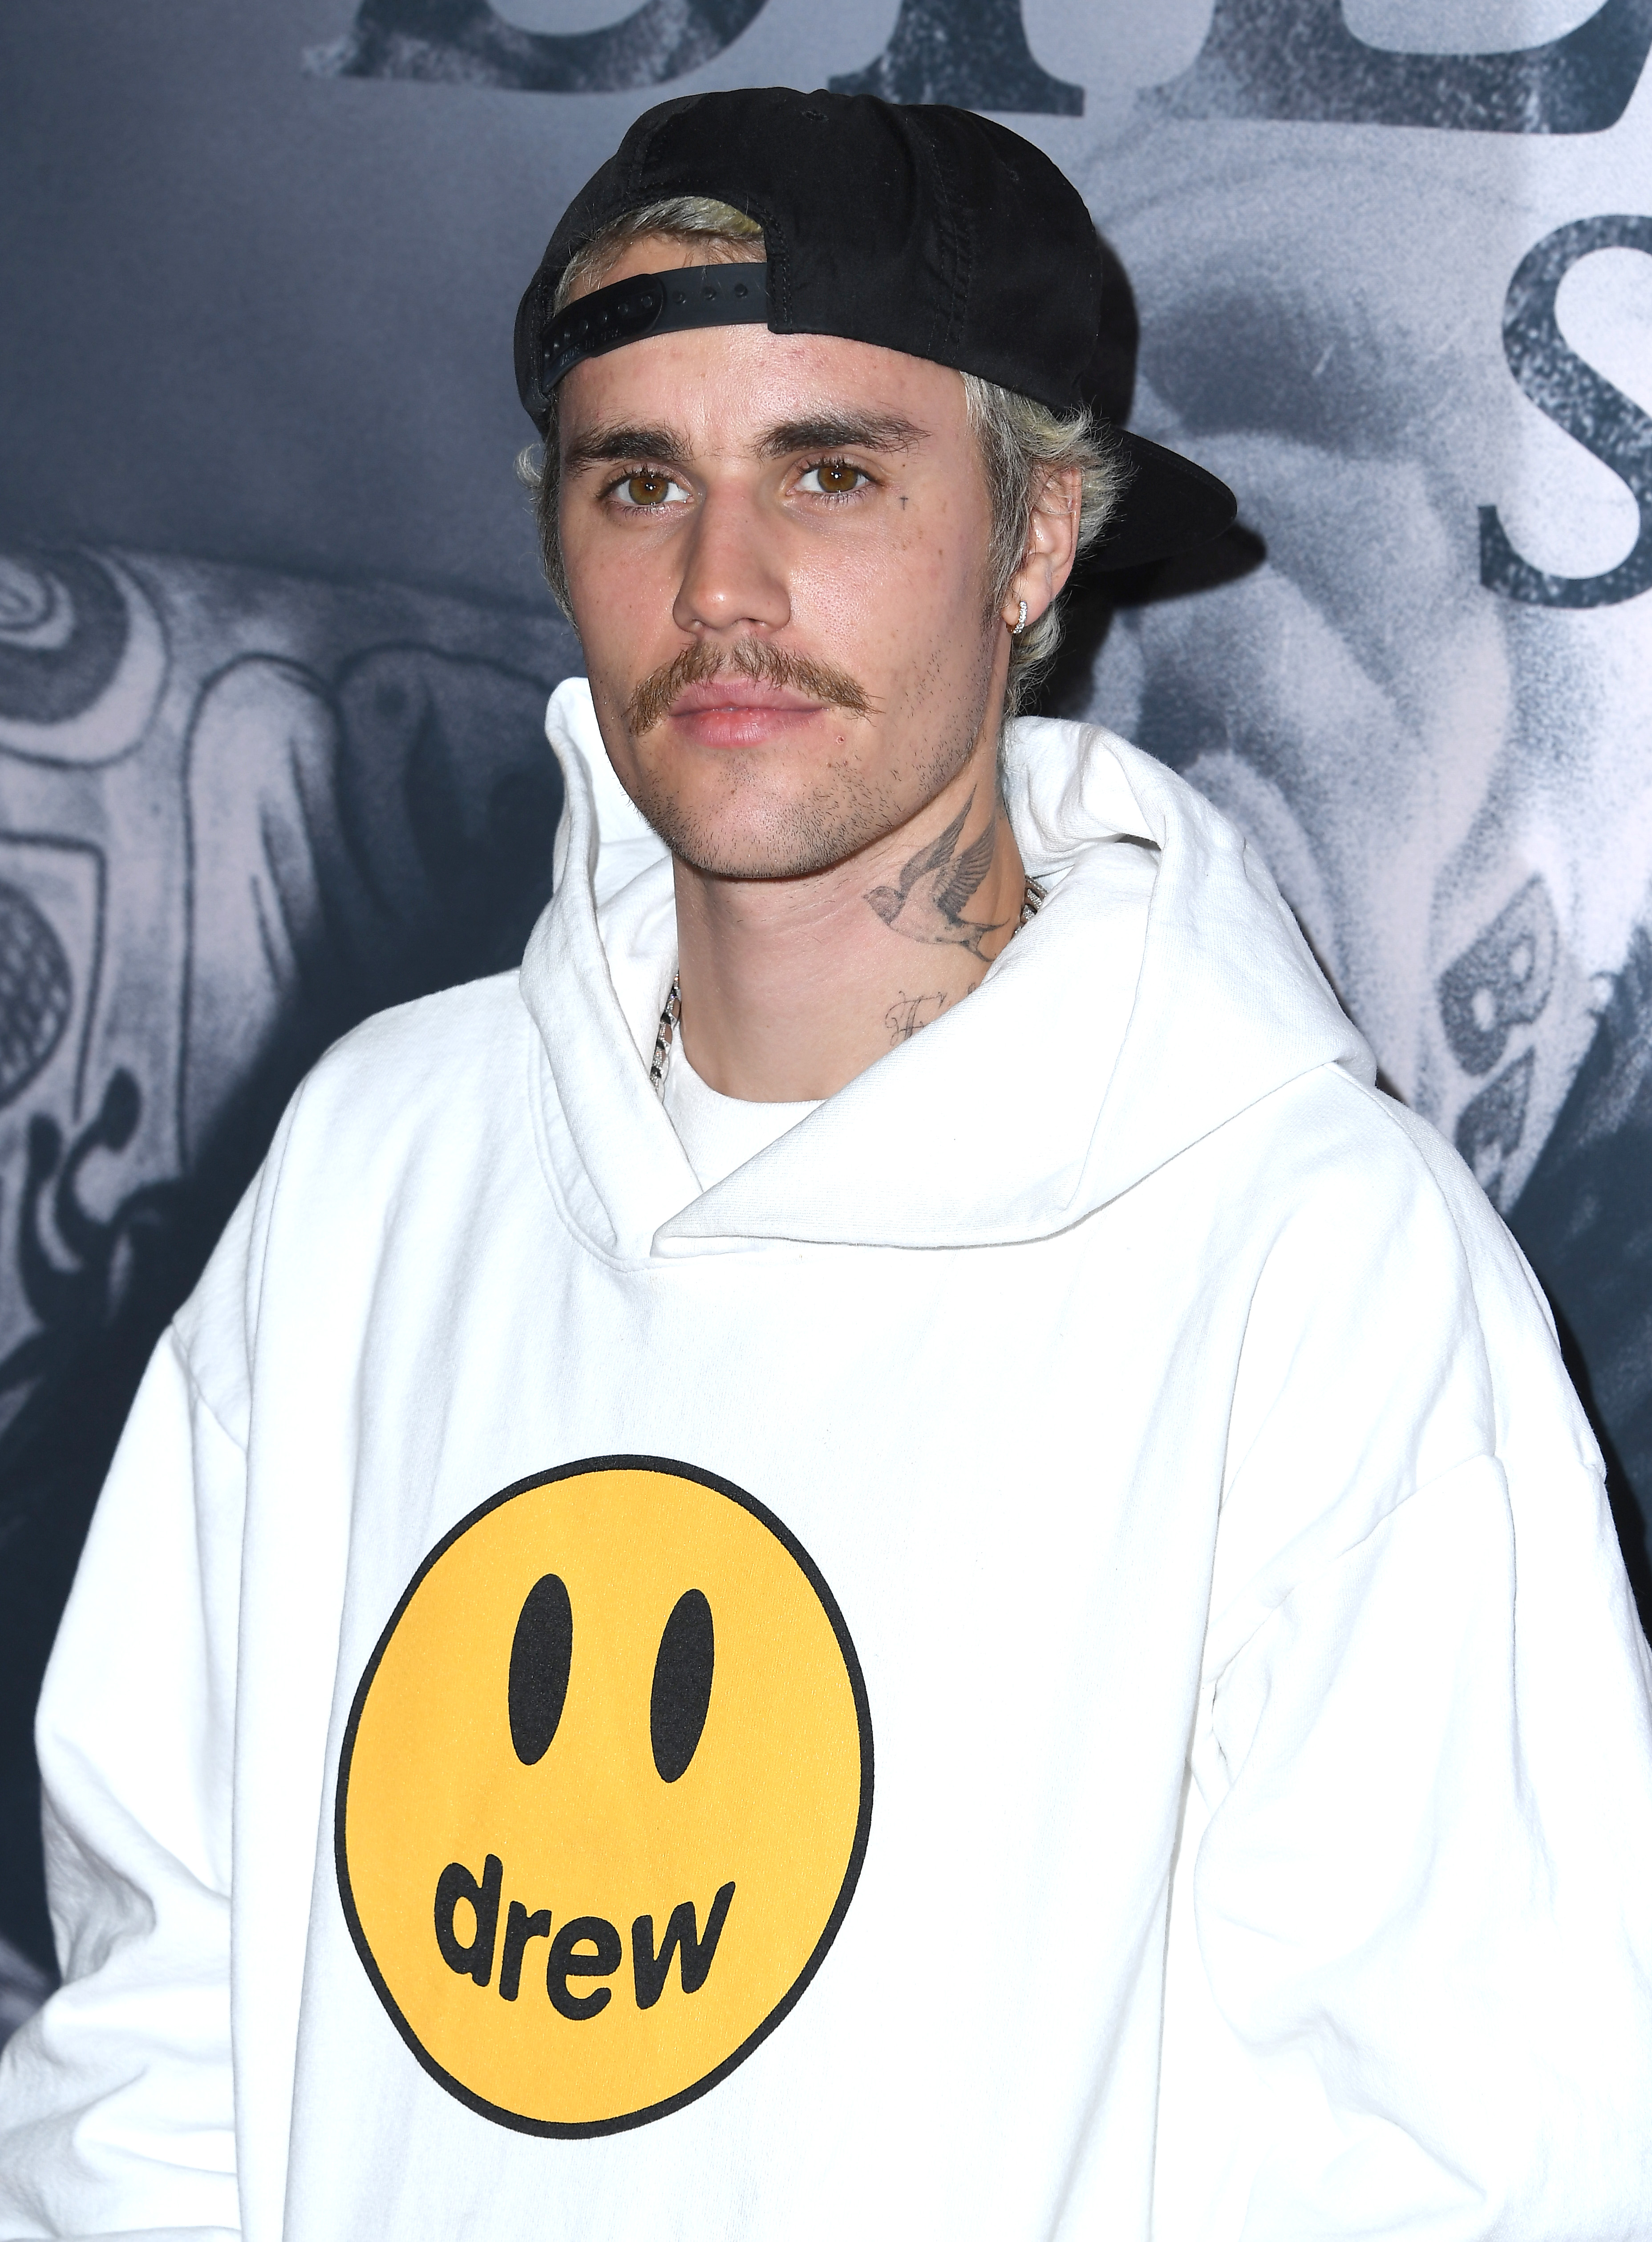 Justin Bieber arrives at the Premiere Of YouTube Originals' "Justin Bieber: Seasons" in Los Angeles, California, on January 27, 2020. | Source: Getty Images